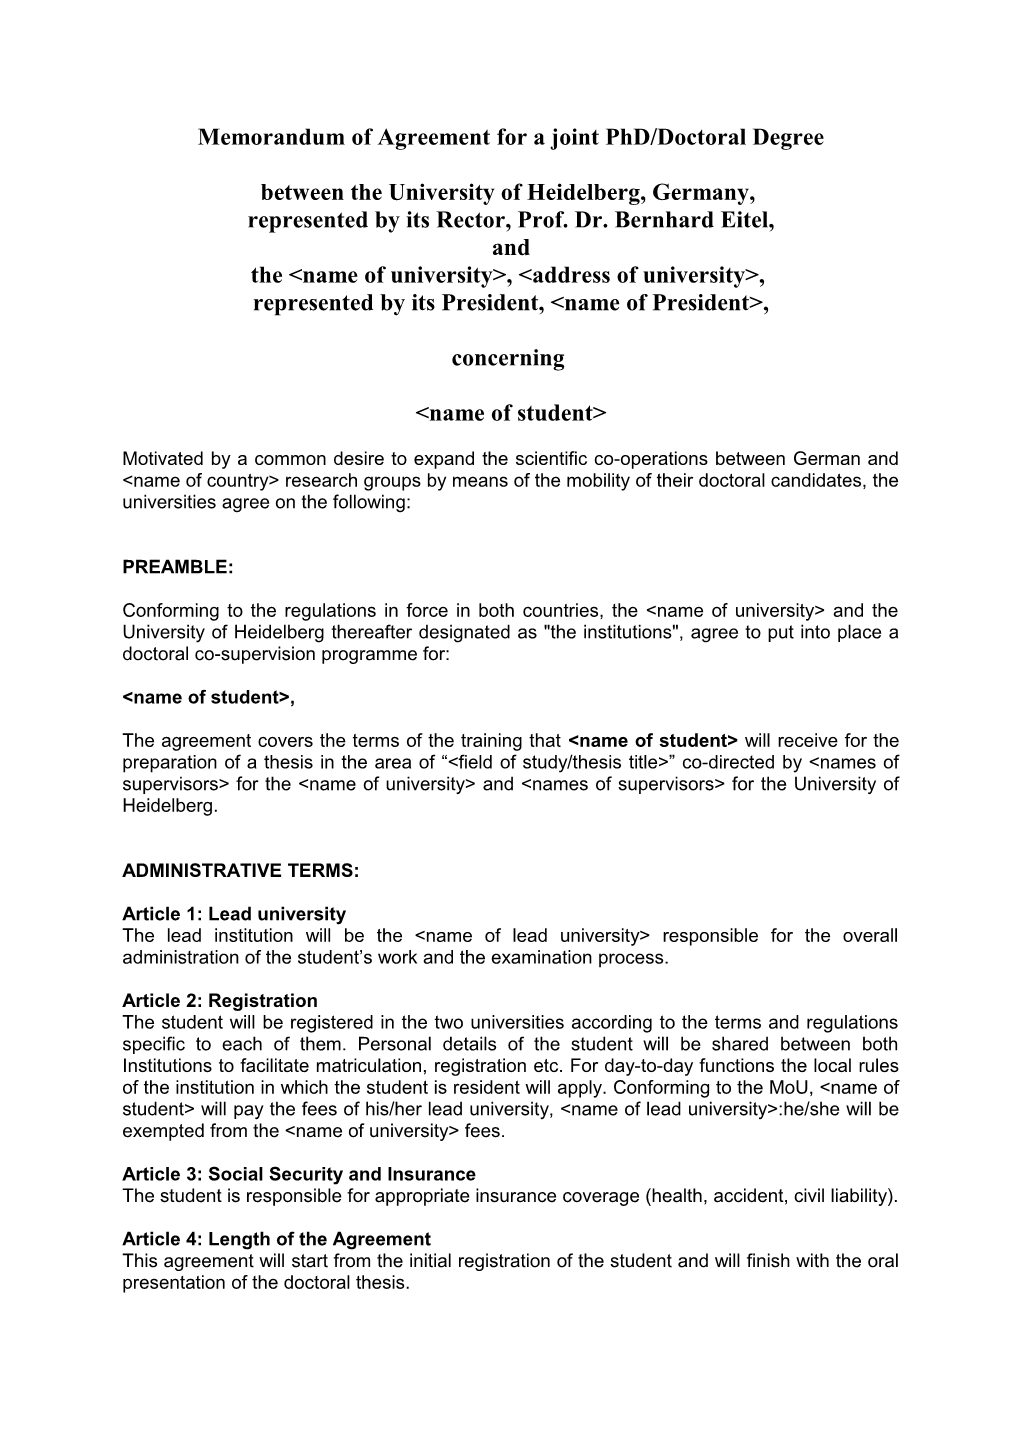 Memorandum of Agreement for a Joint Phd/Doctoral Degree